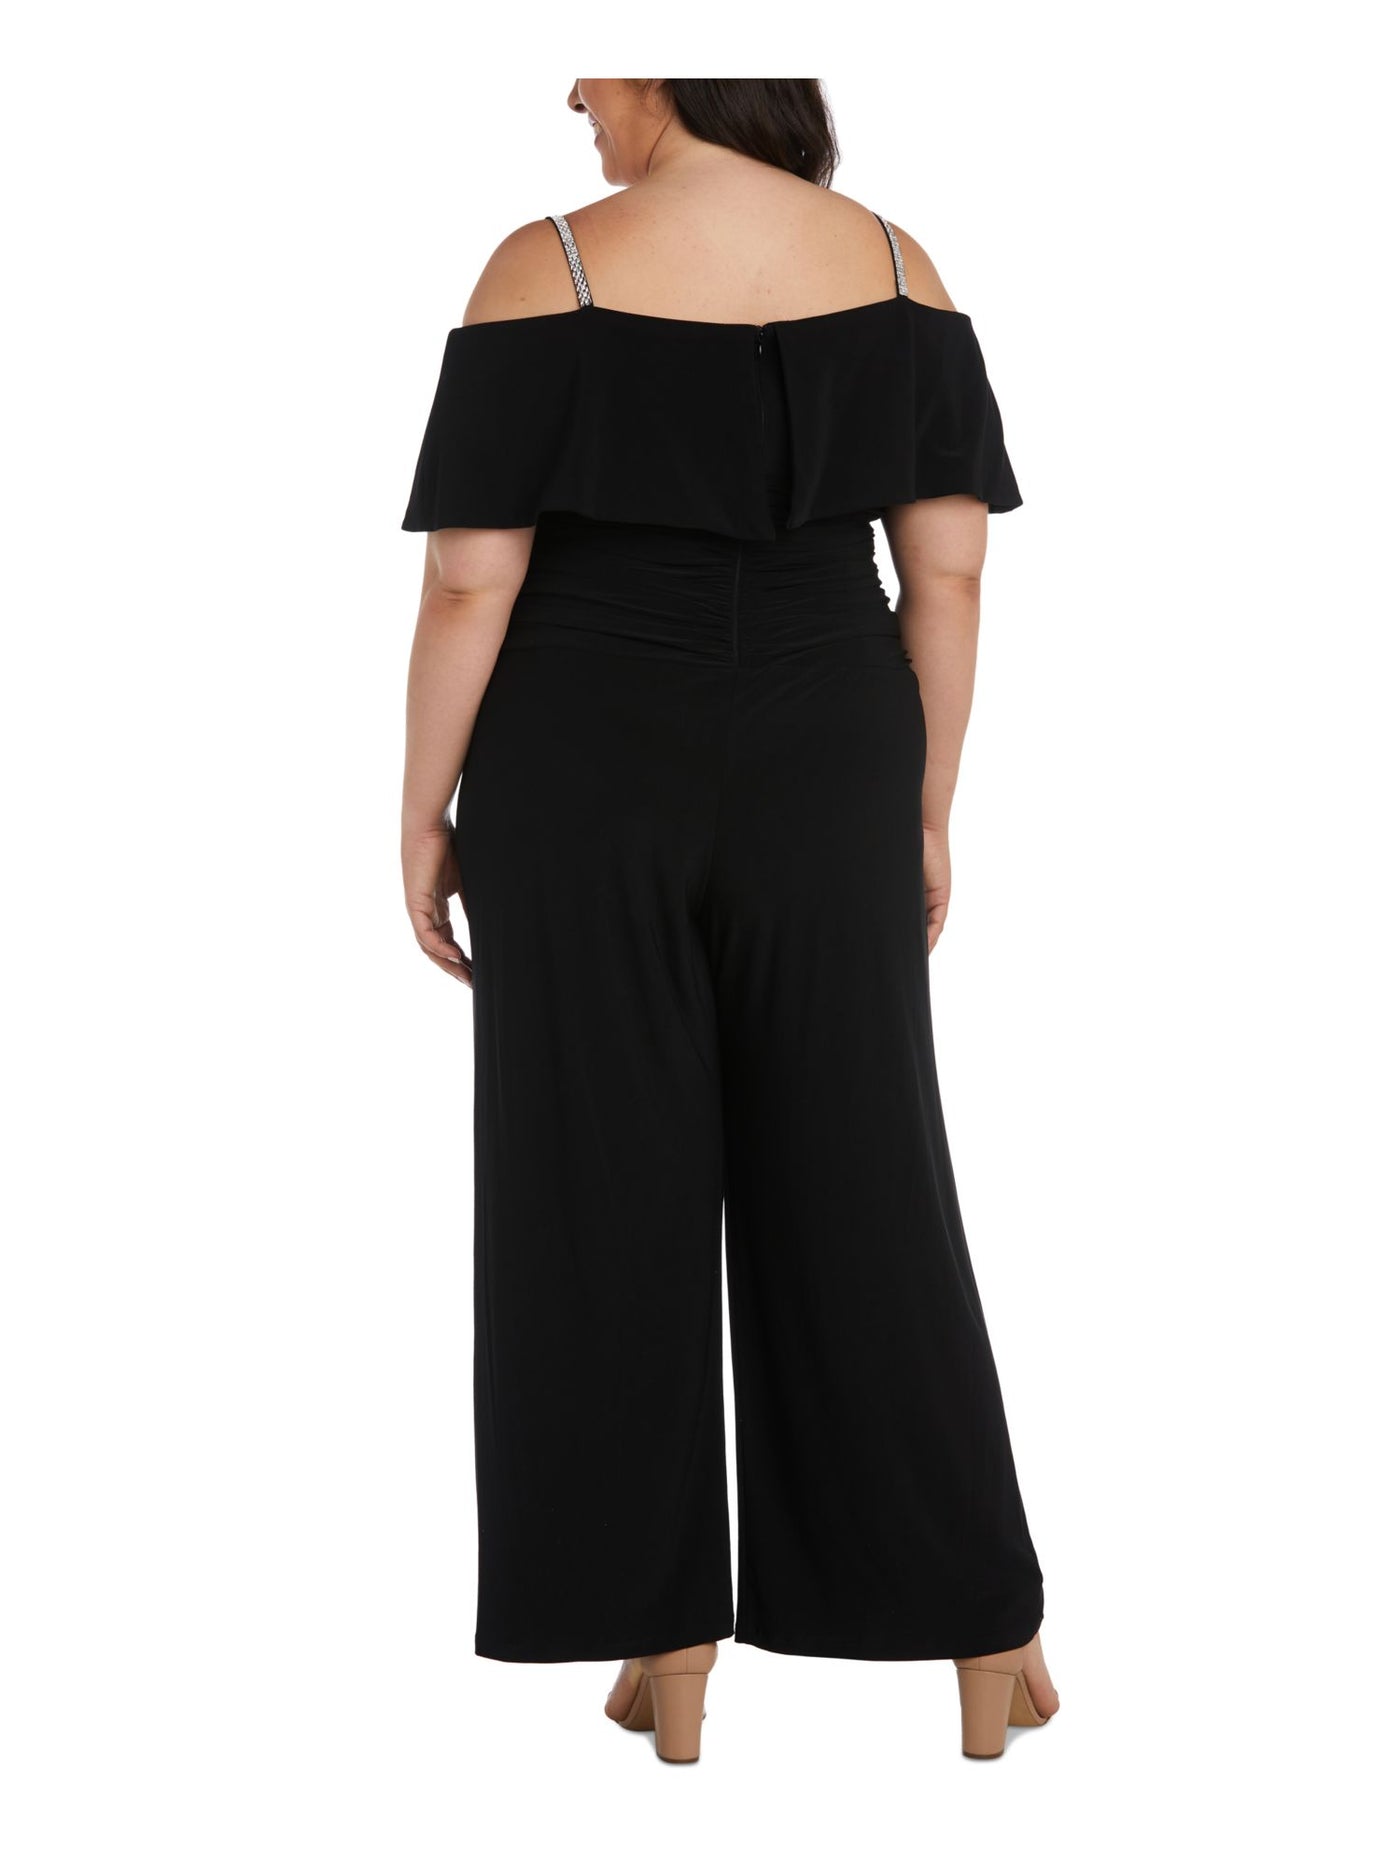 R&M RICHARDS WOMAN Womens Black Ruched Zippered Ruffled Overlay Wide Leg Flutter Sleeve Off Shoulder Party High Waist Jumpsuit Plus 22W